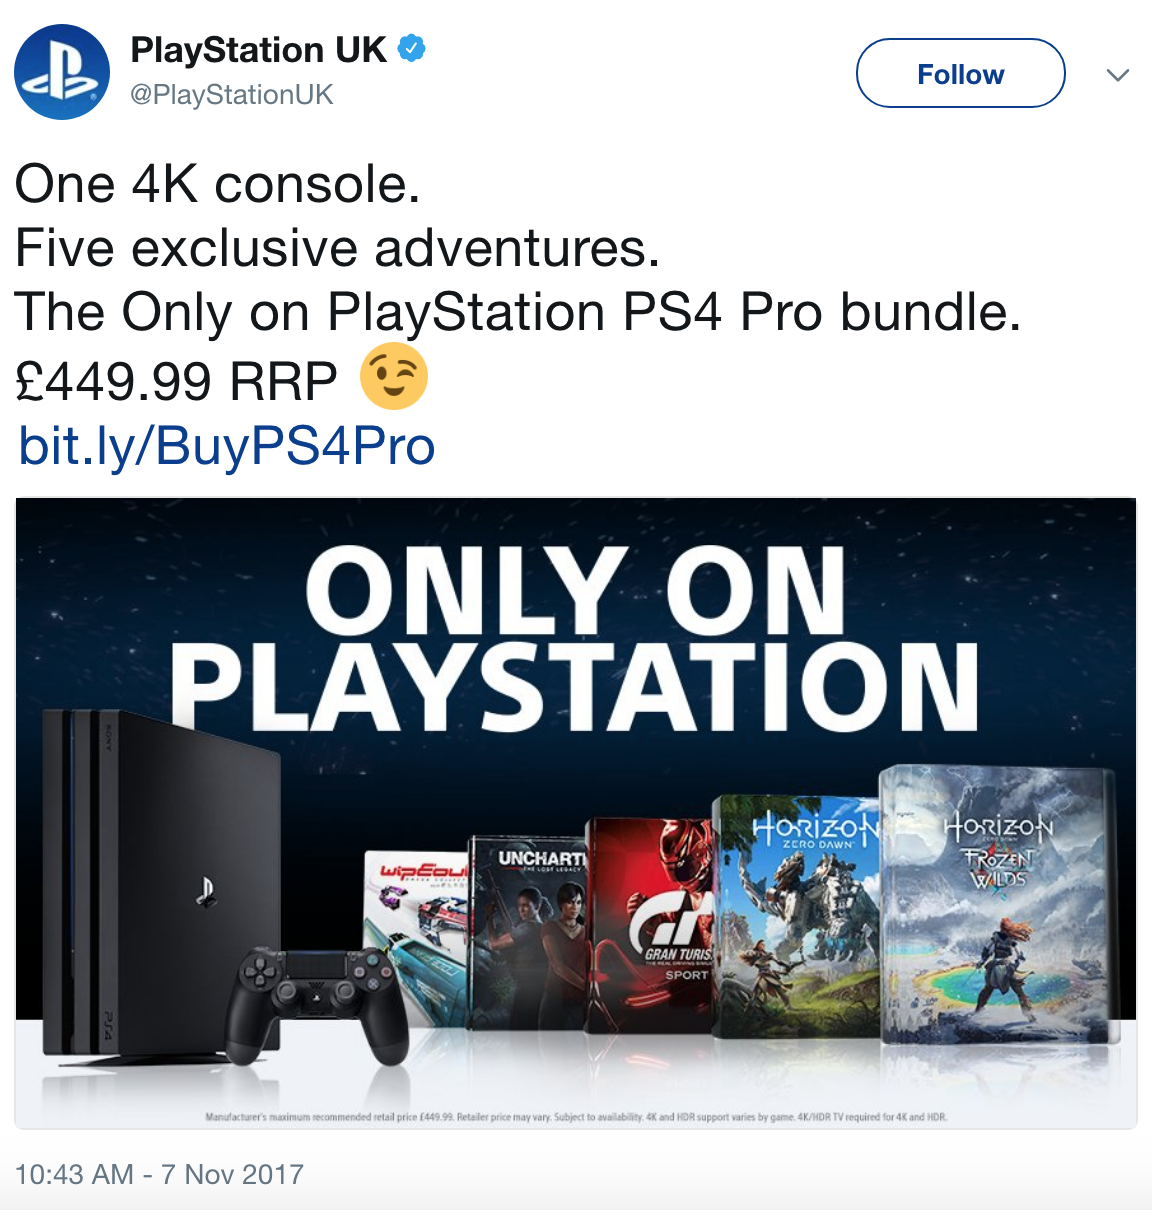 Xbox One X Is Here, So UK Just Announced A PS4 Pro Bundle The Same Price - GameSpot